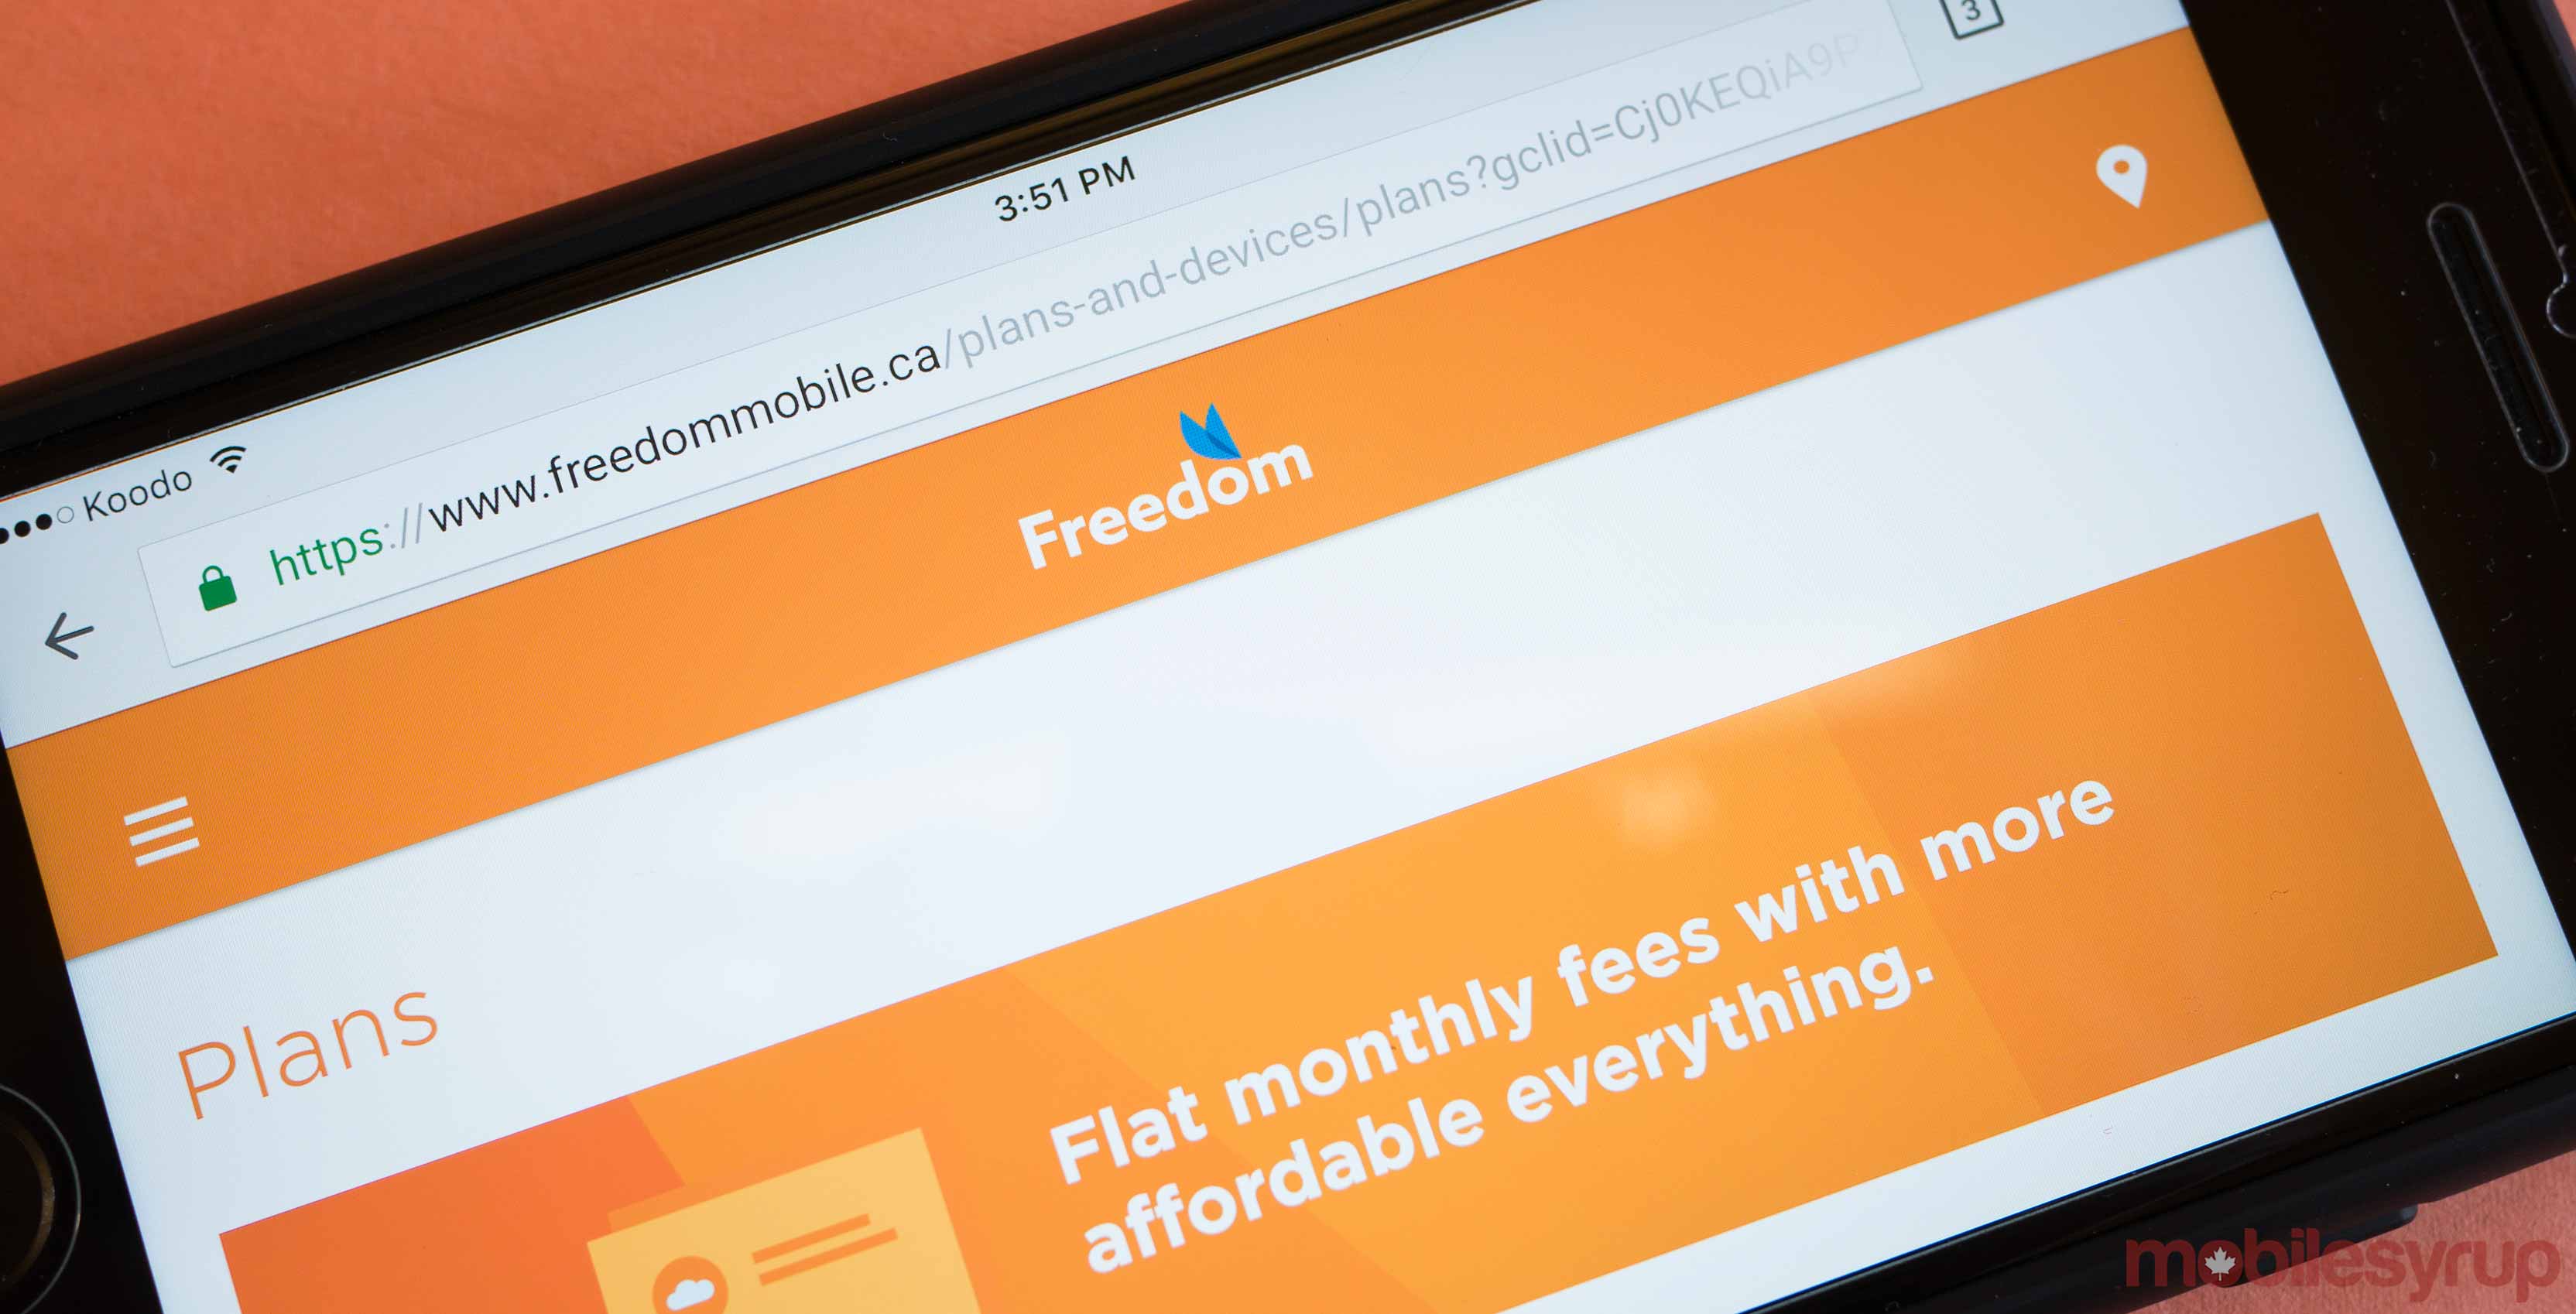 Freedom Mobile lte network